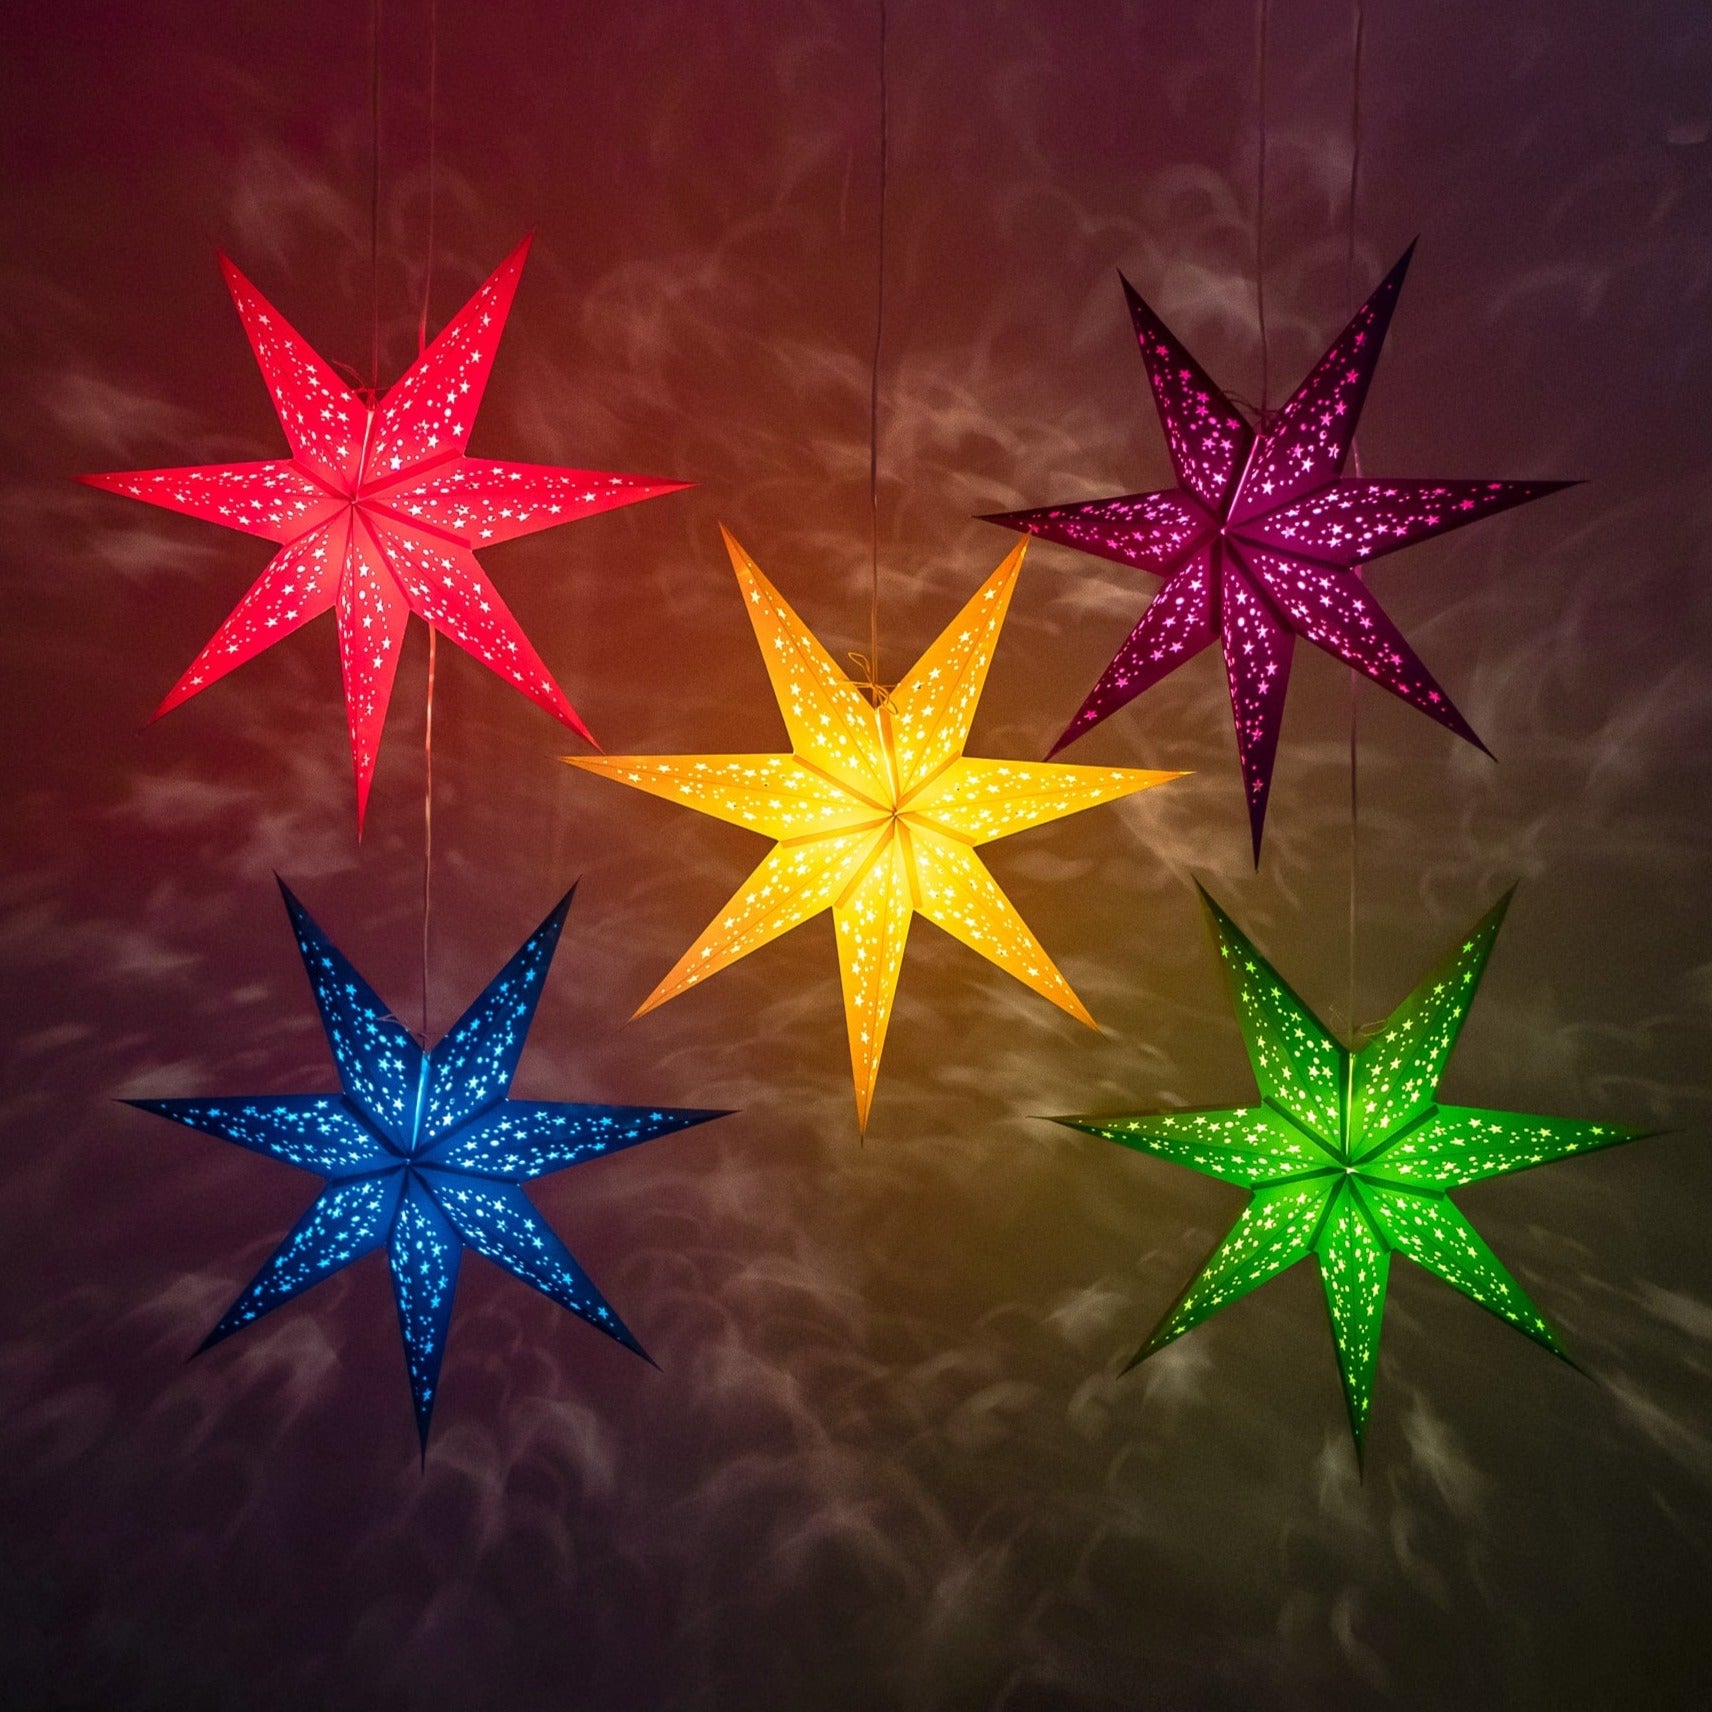 Decorative star lanterns crafted from coloured paper